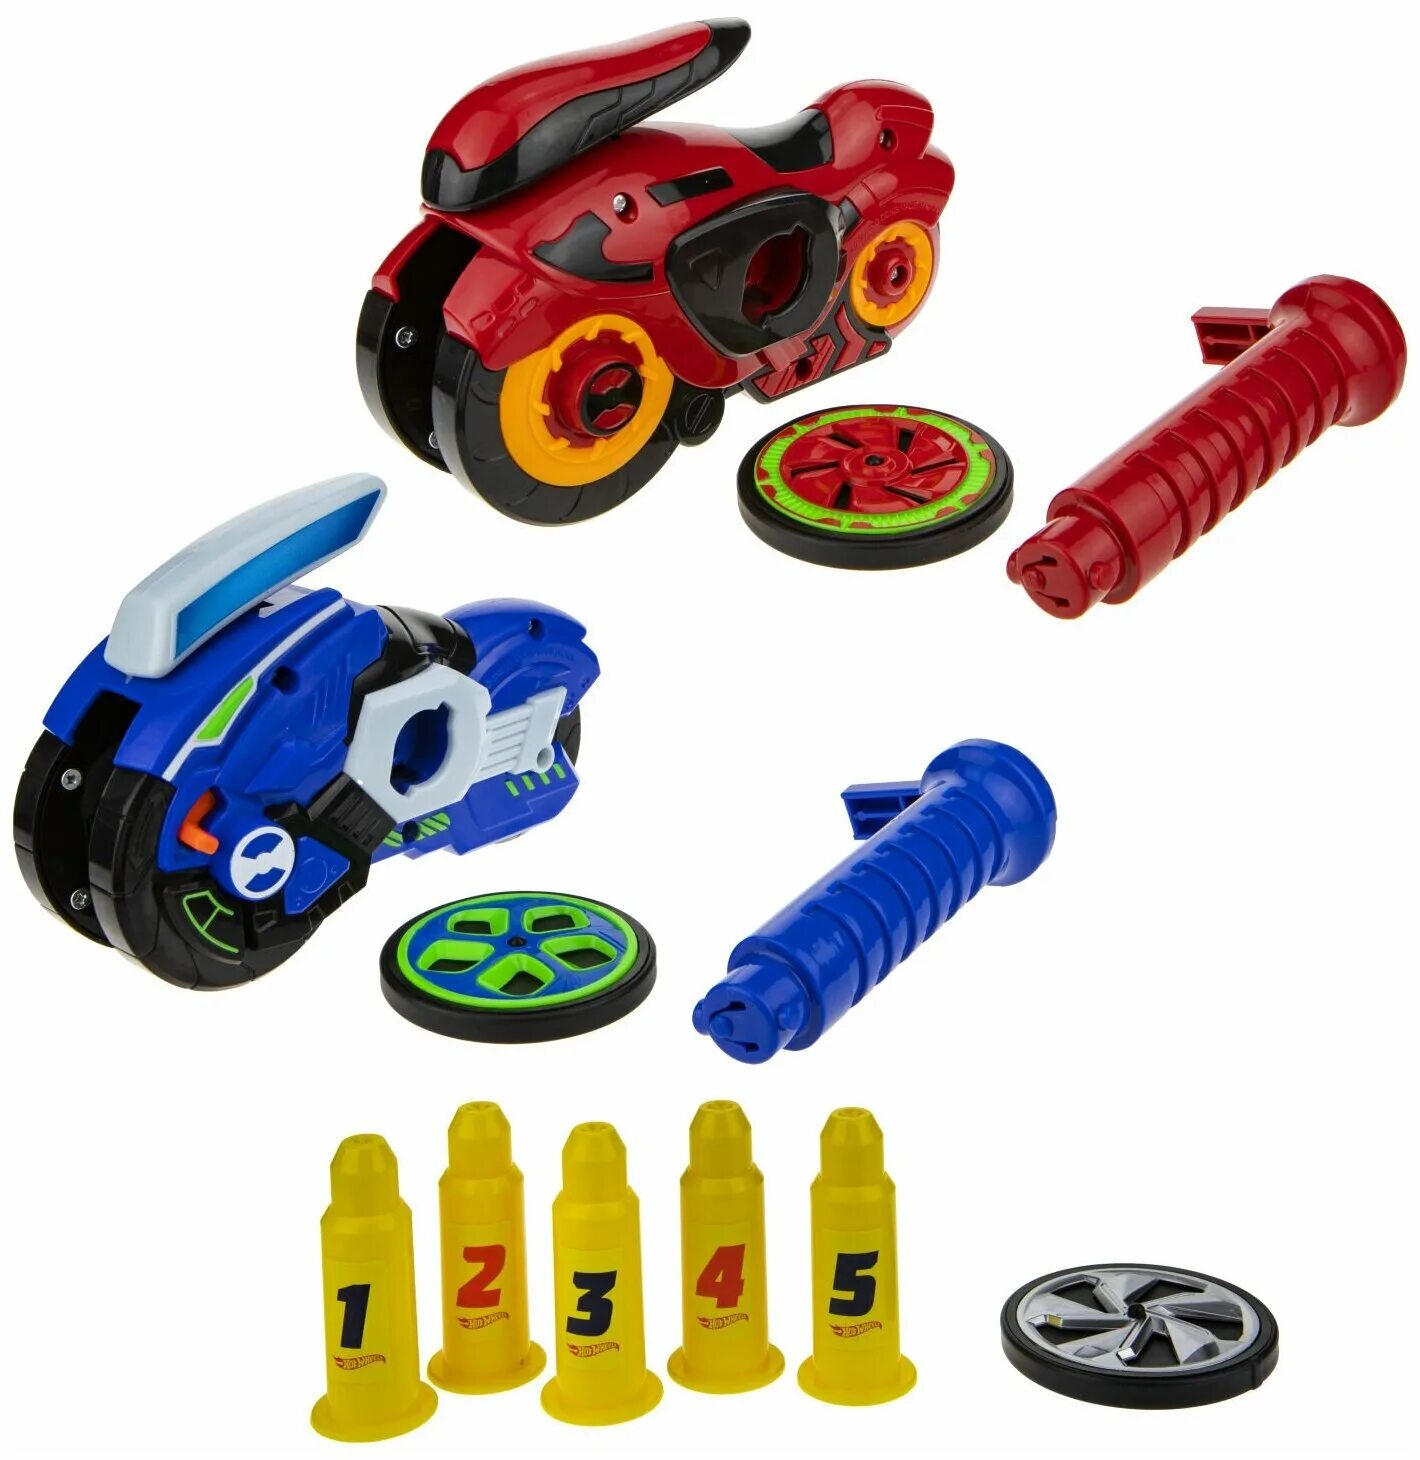 Spin racers. Hot Wheels Spin Racer Deluxe Set (2 пуск. Механизма + 3 диска, с аксесс., 16 см, коробка). Хот Вилс спин рейсер. Набор hot Wheels Spin Racer Deluxe Set 1toy т19375. Спин рейсер игрушка.